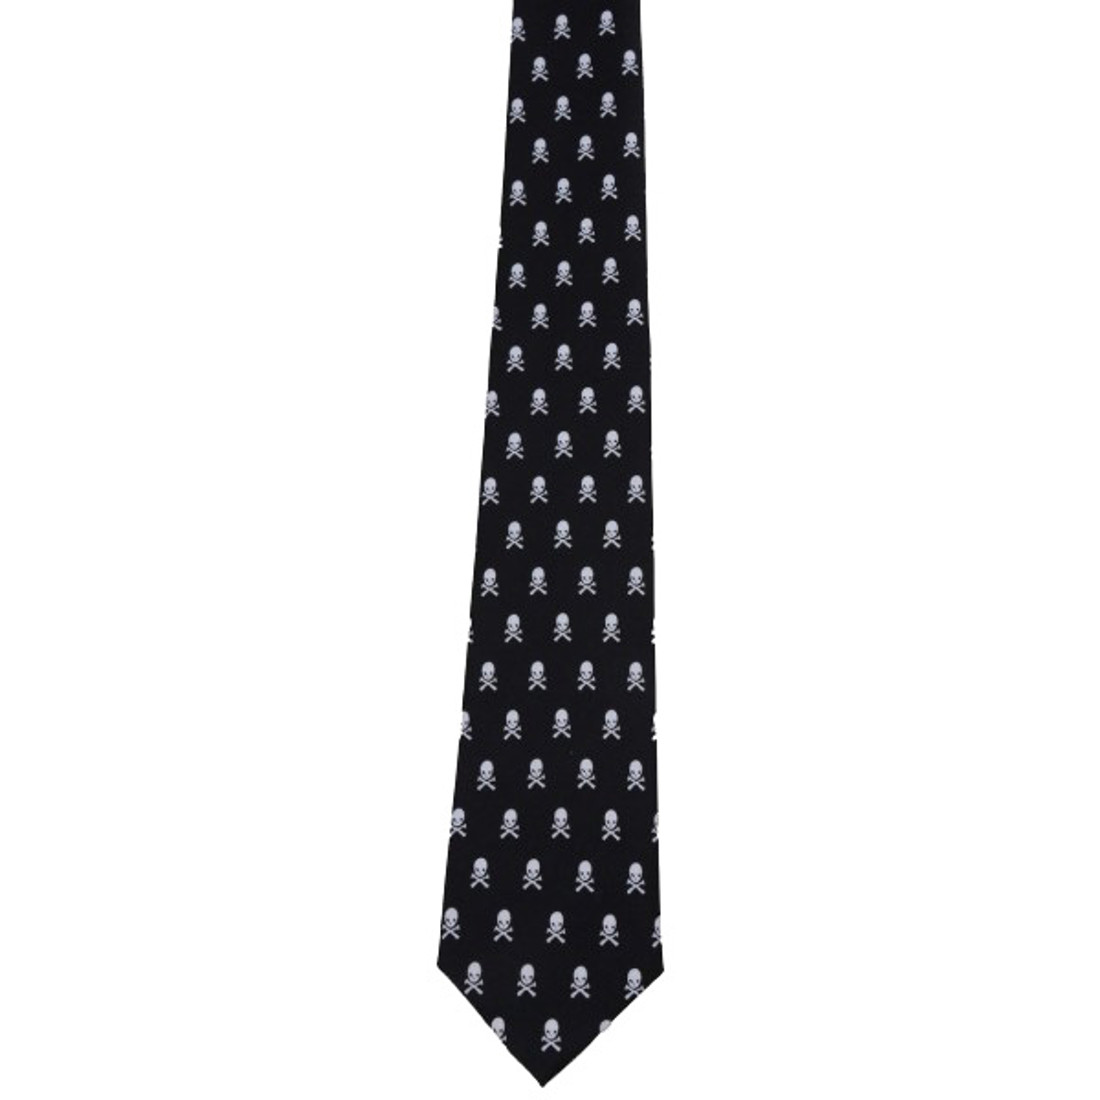 Black tie with little white skull and crossbones.